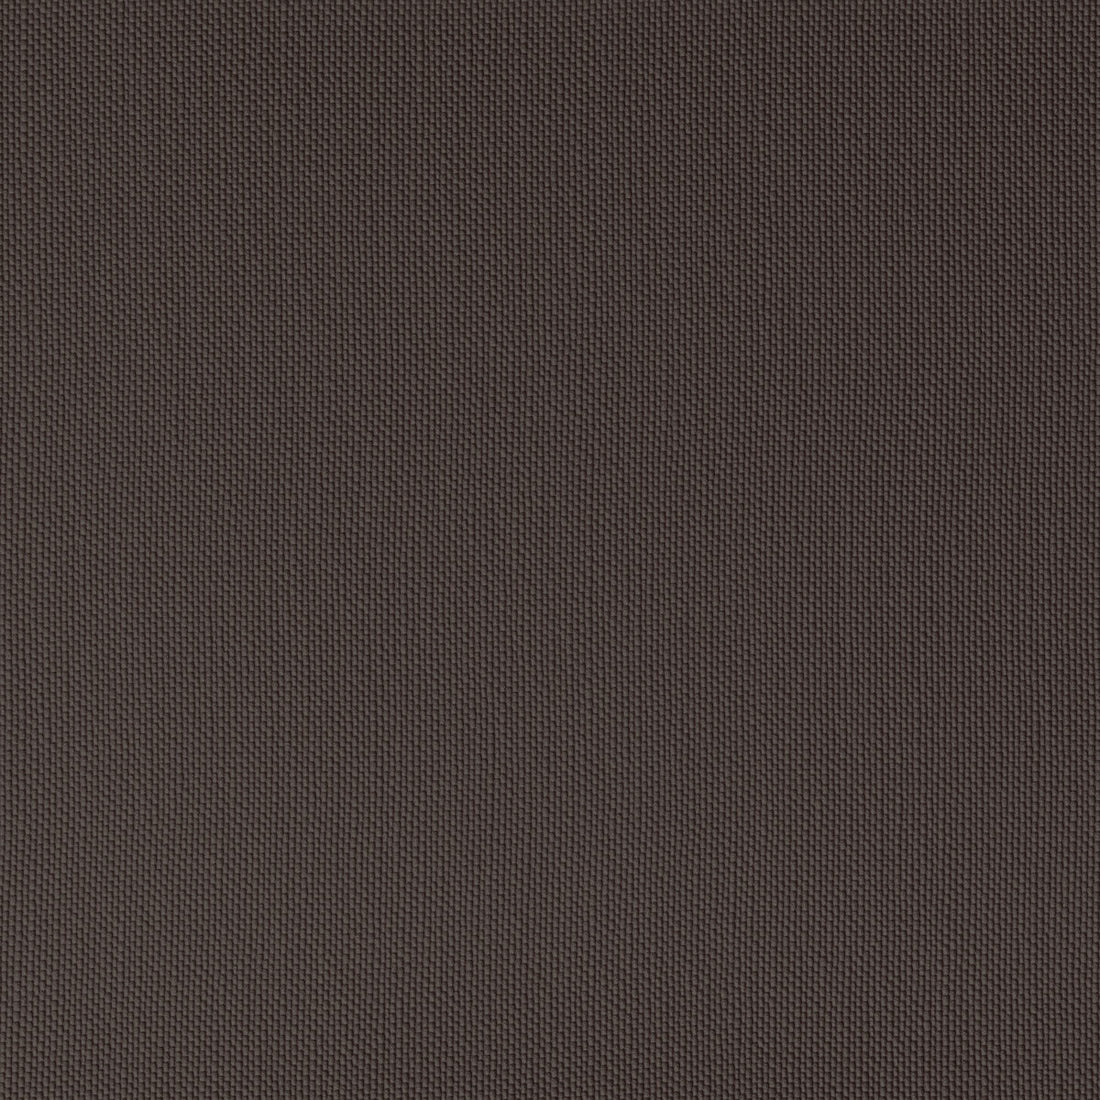 Ventura fabric in cocoa color - pattern VENTURA.6.0 - by Kravet Contract in the Foundations / Value collection